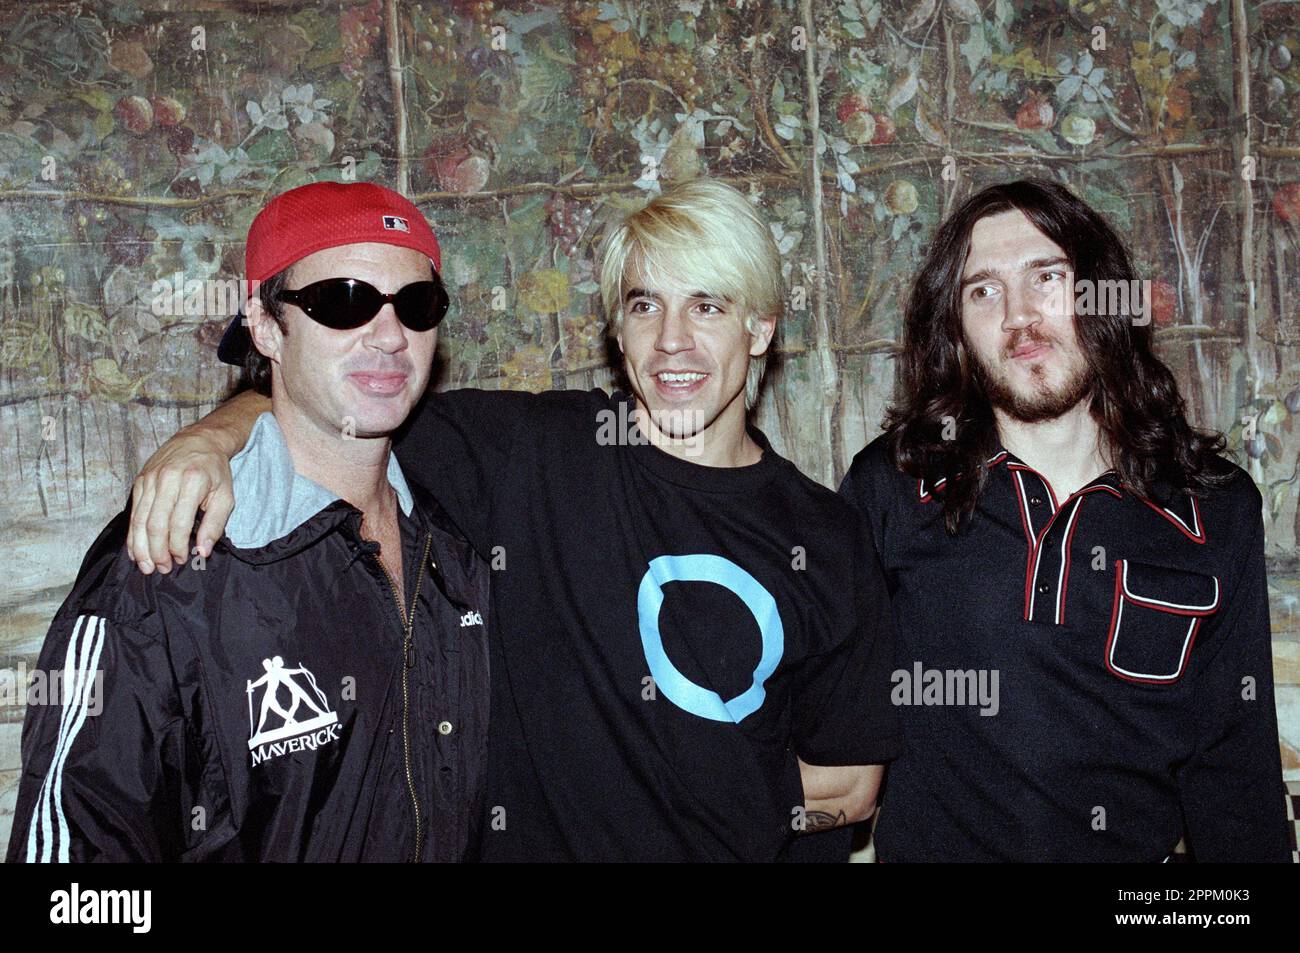 Milan Italy  25/07/1999: Chad Smith,Anthony Kiedis and John Frusciante of the band Red Hot Chili Peppers during the photo session before the press conference Stock Photo